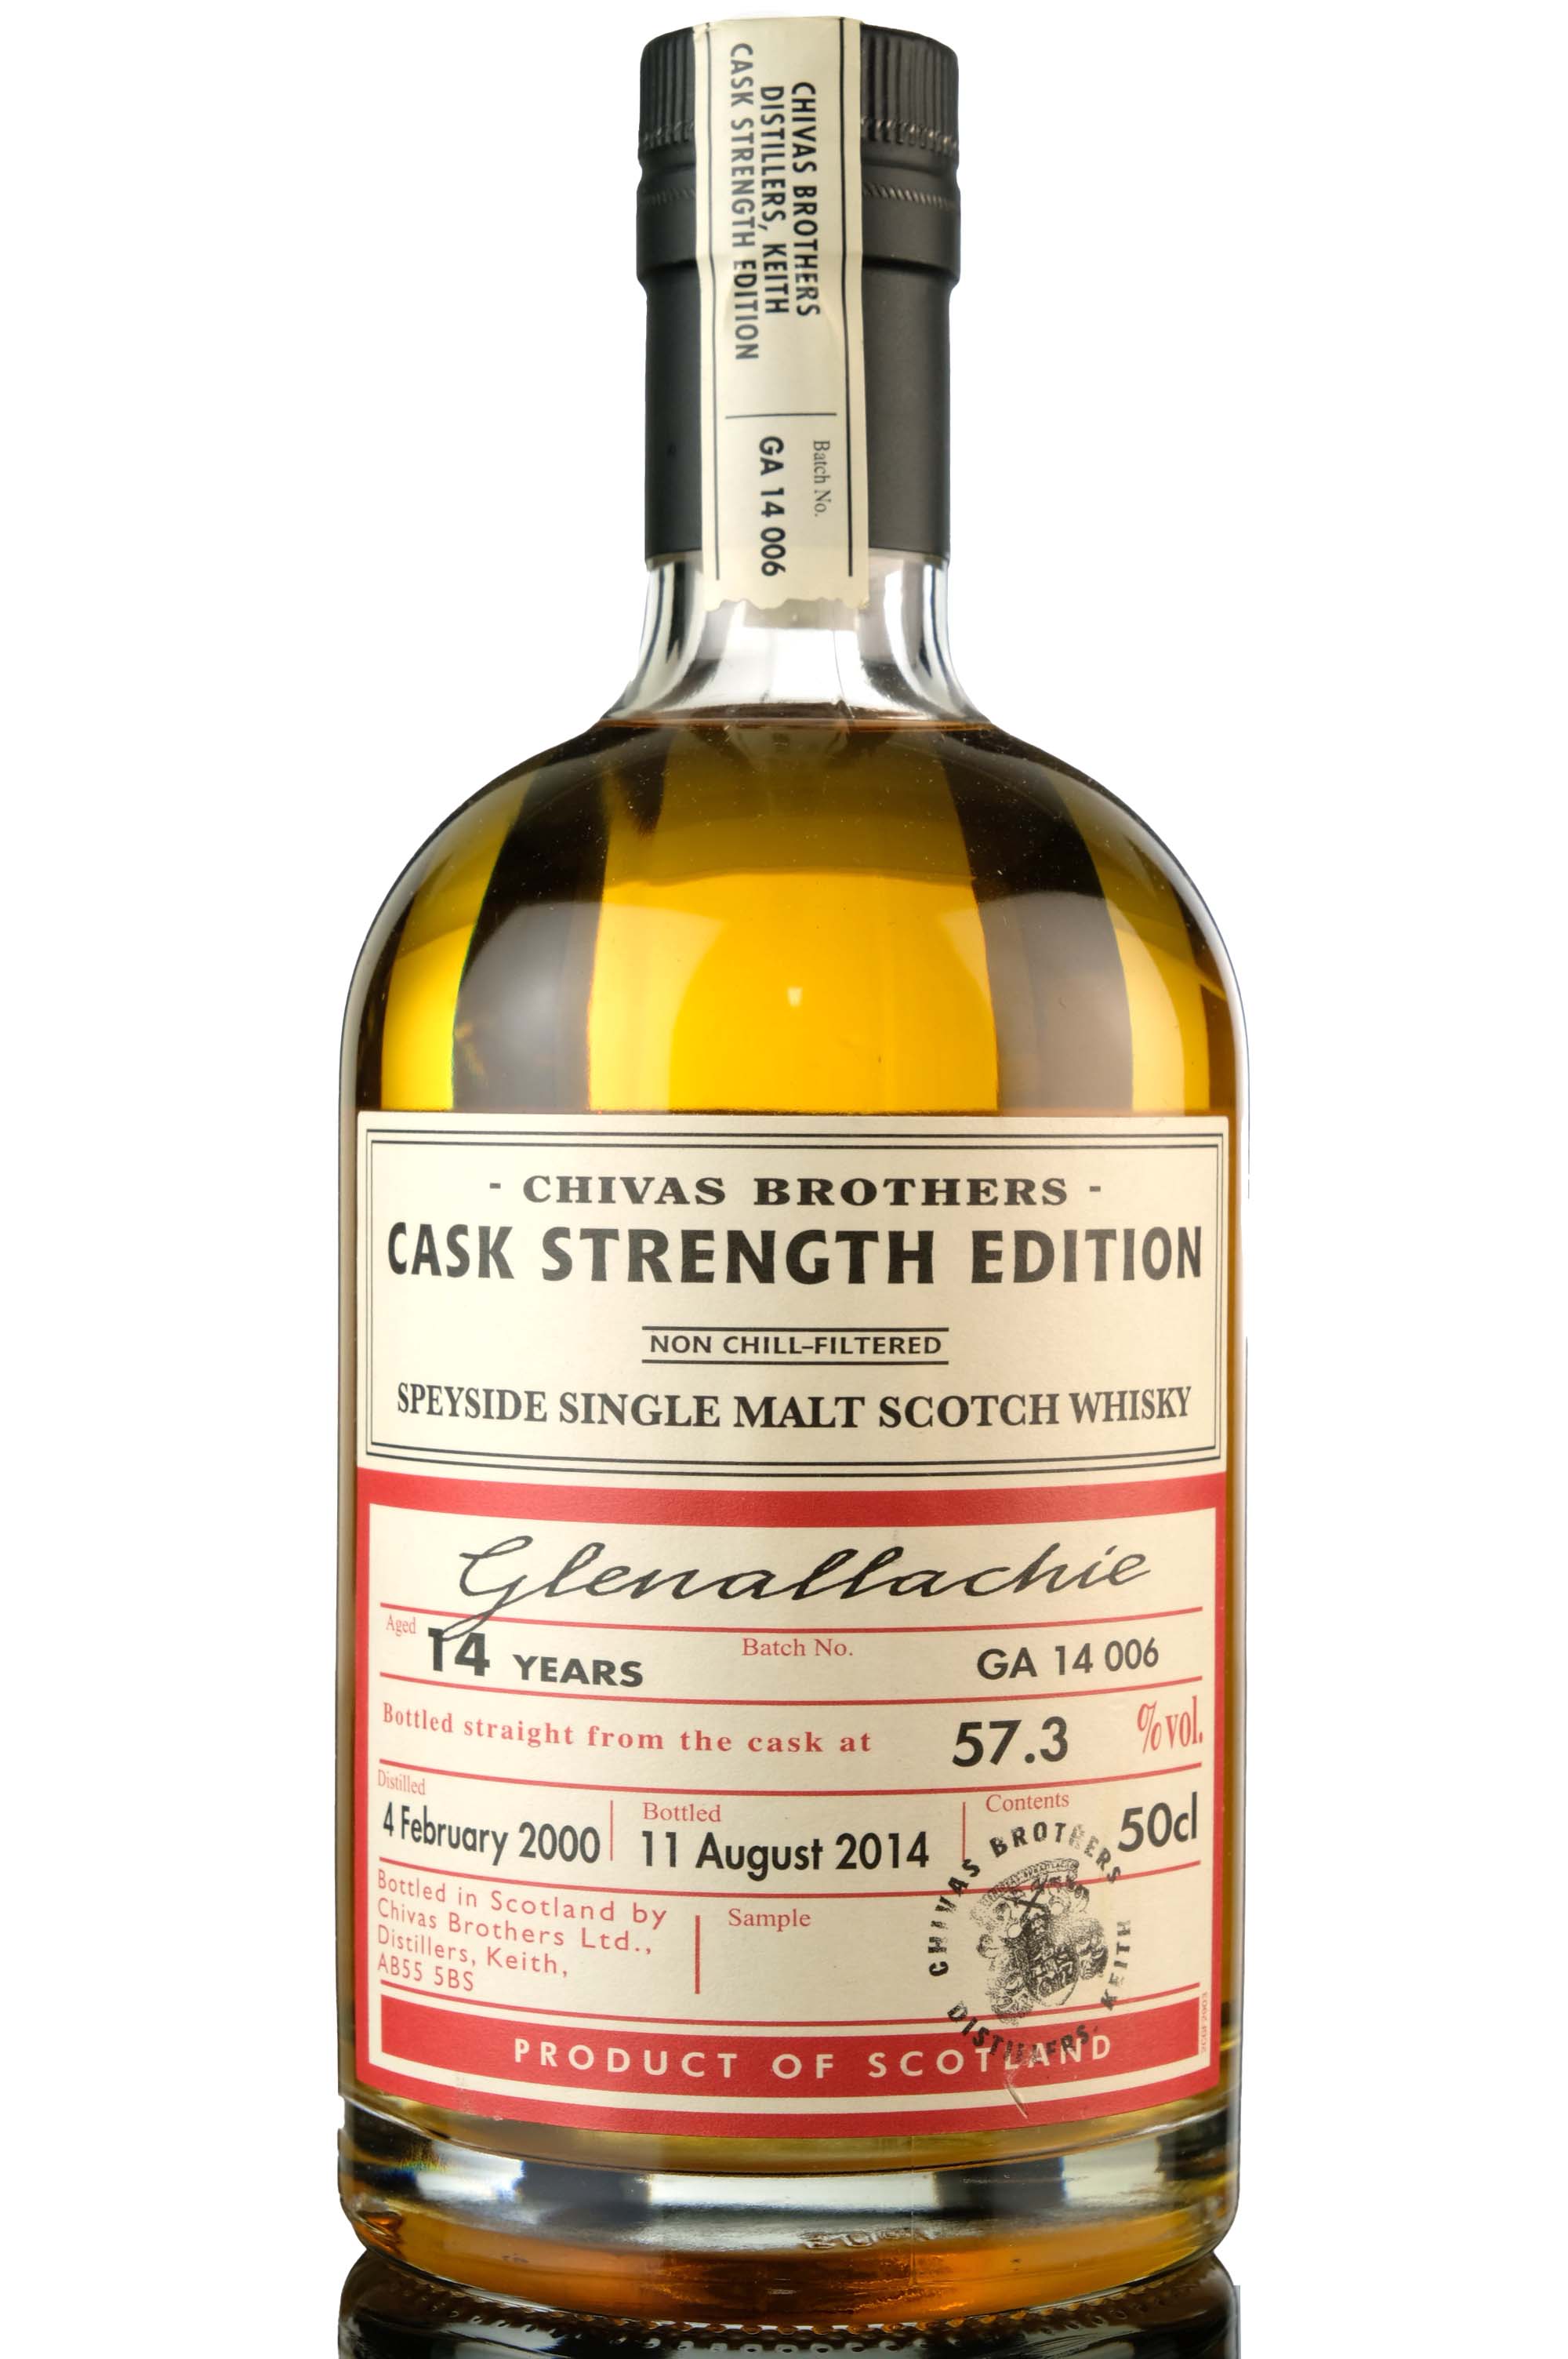 Glenallachie 2000-2014 - 14 Year Old - Chivas Brothers Cask Strength Edition